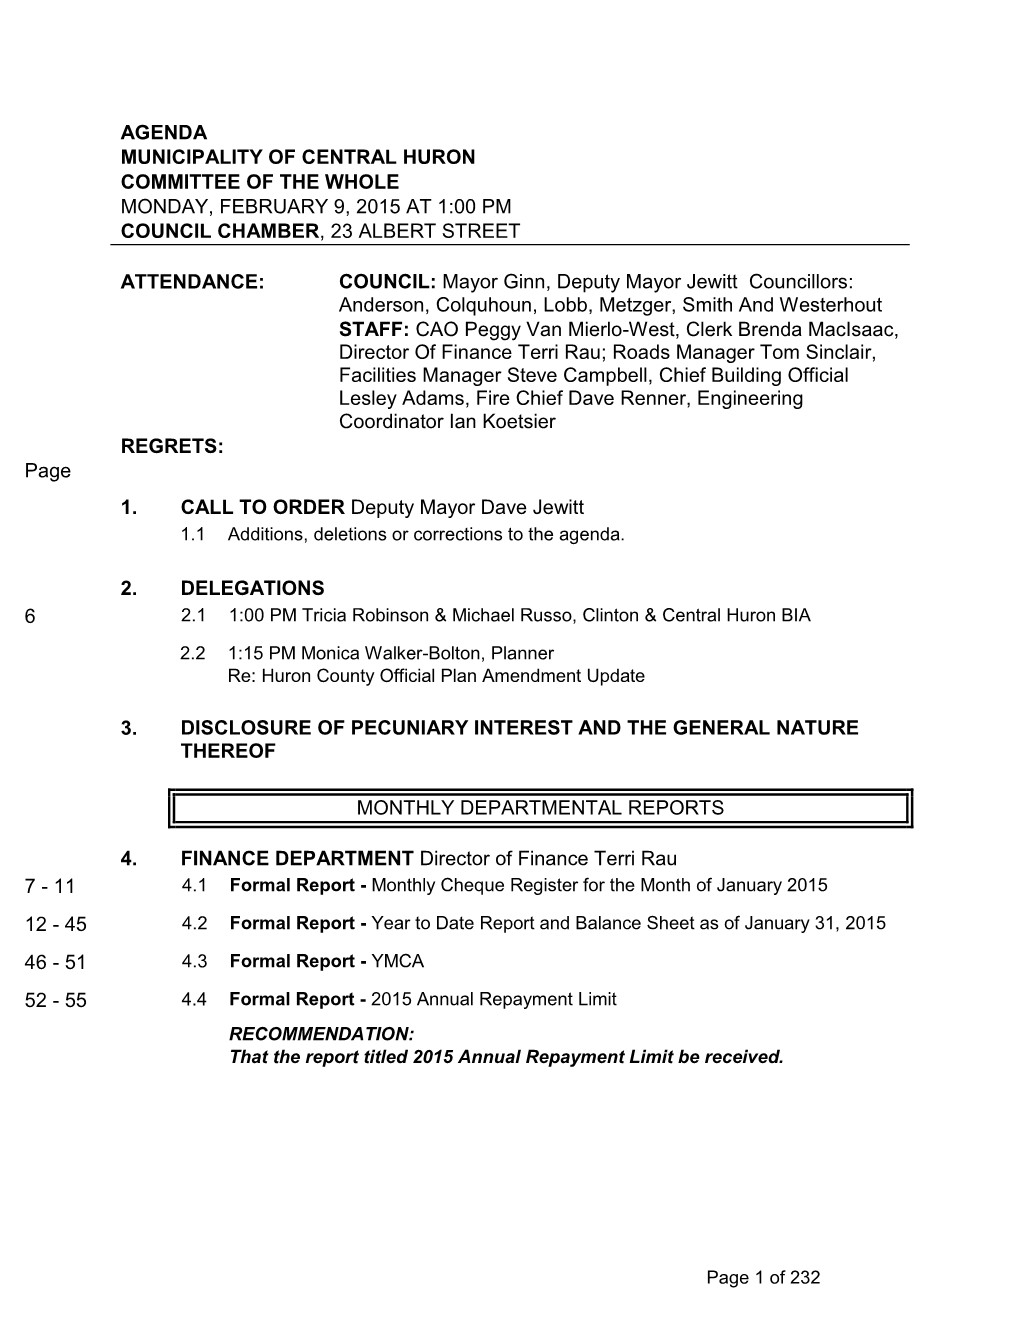 Agenda Municipality of Central Huron Committee of the Whole Monday, February 9, 2015 at 1:00 Pm Council Chamber, 23 Albert Street